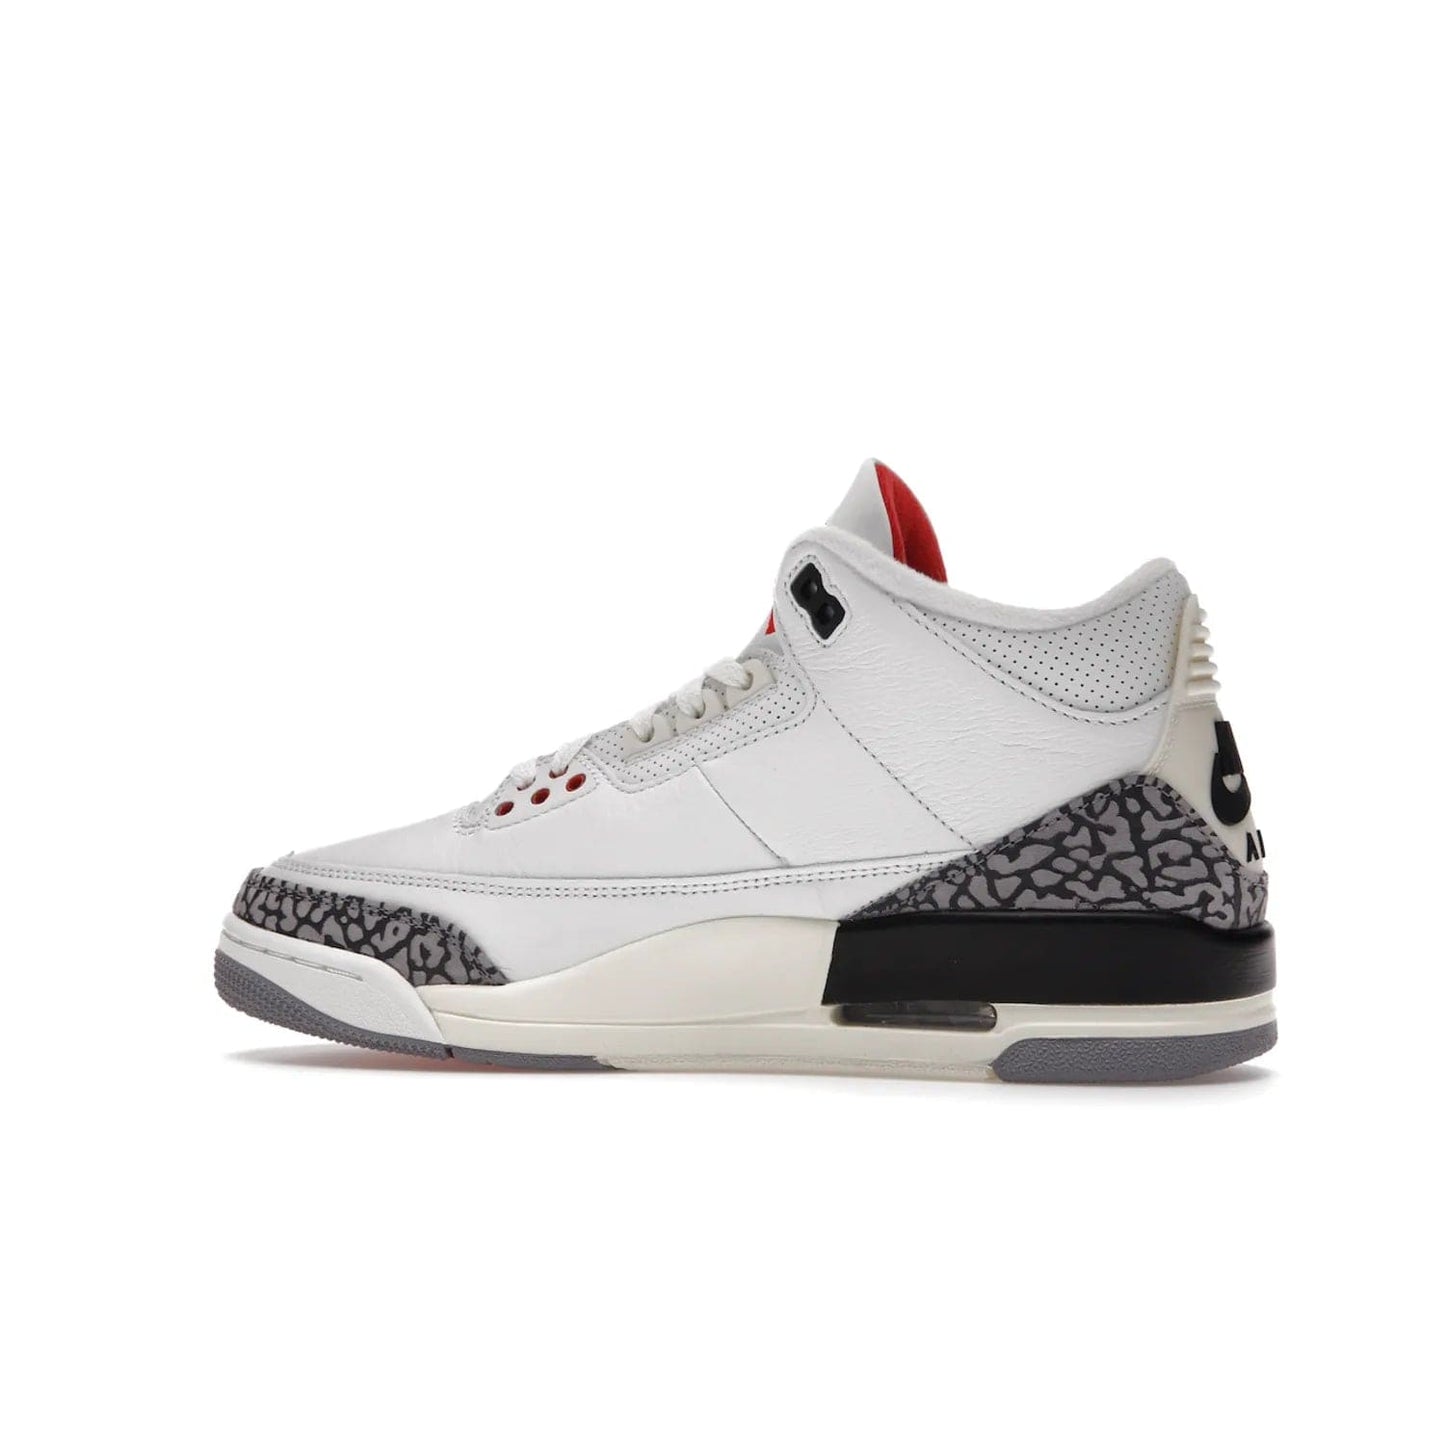 Jordan 3 Retro White Cement Reimagined - Image 21 - Only at www.BallersClubKickz.com - The Reimagined Air Jordan 3 Retro in a Summit White/Fire Red/Black/Cement Grey colorway is launching on March 11, 2023. Featuring a white leather upper, off-white midsoles and heel tabs, this vintage-look sneaker is a must-have.